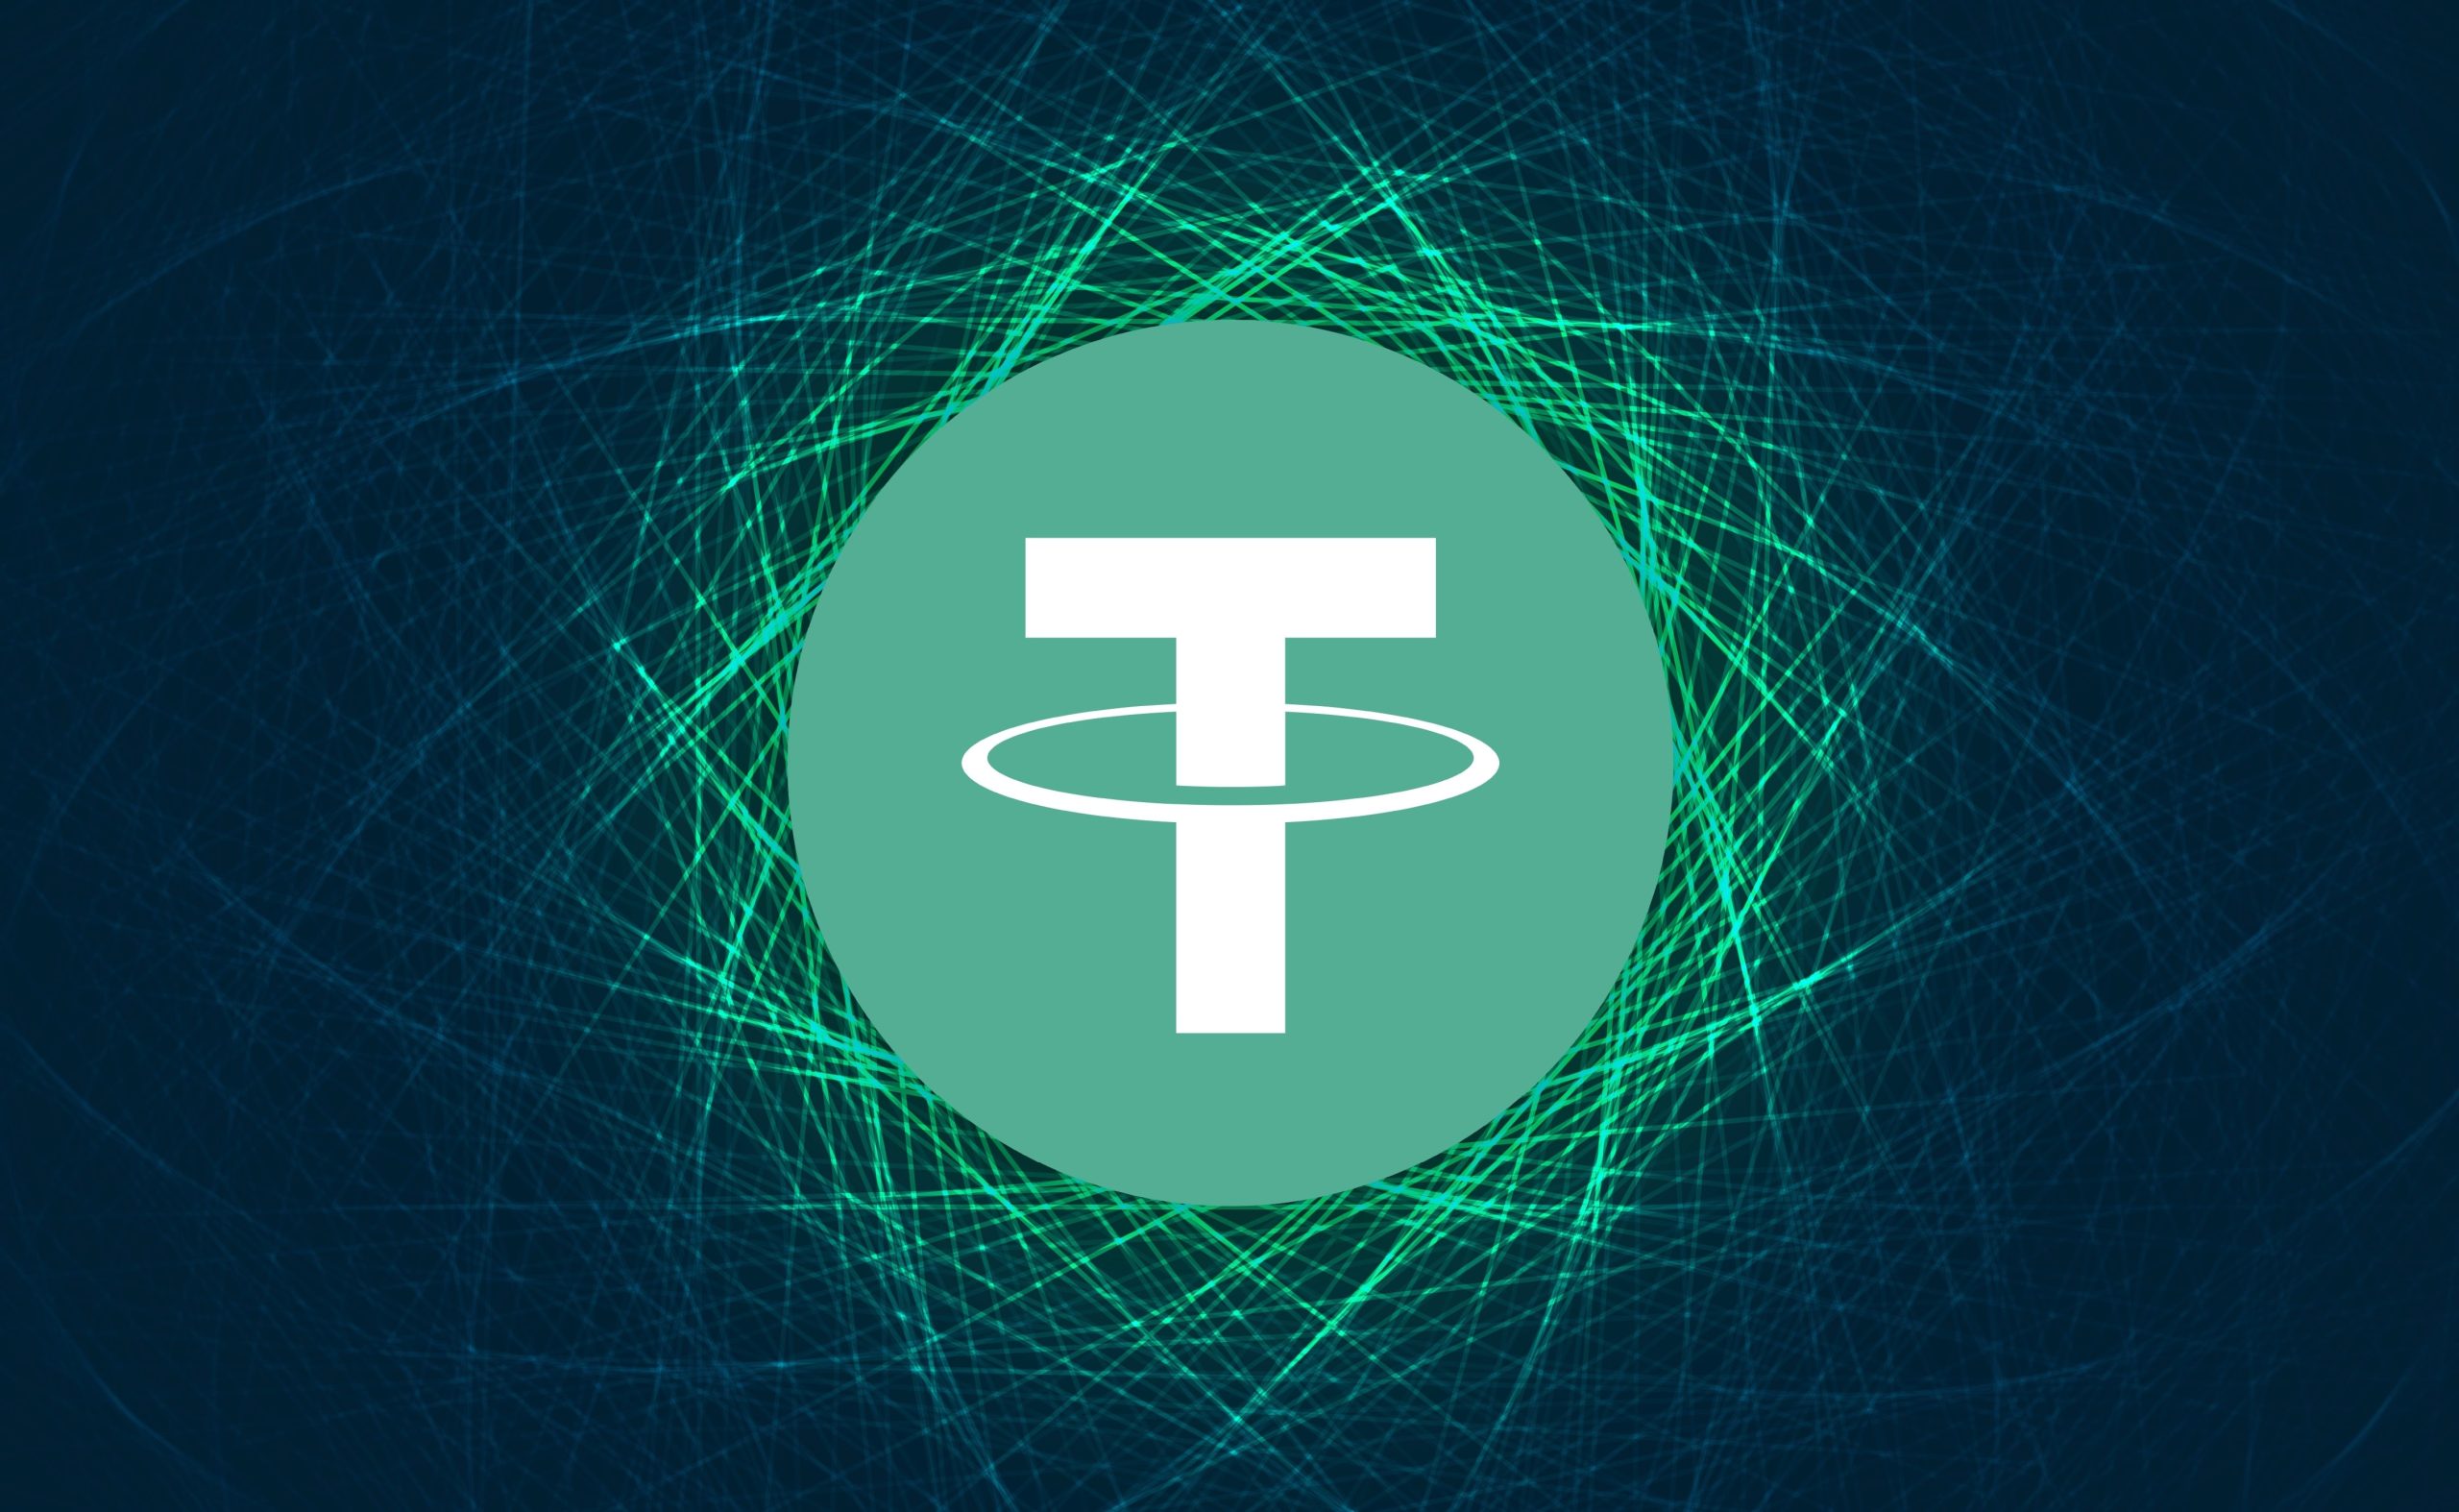 Tether’s USDT Stablecoin Depegs from US Dollar on Exchanges After Company Froze $435M